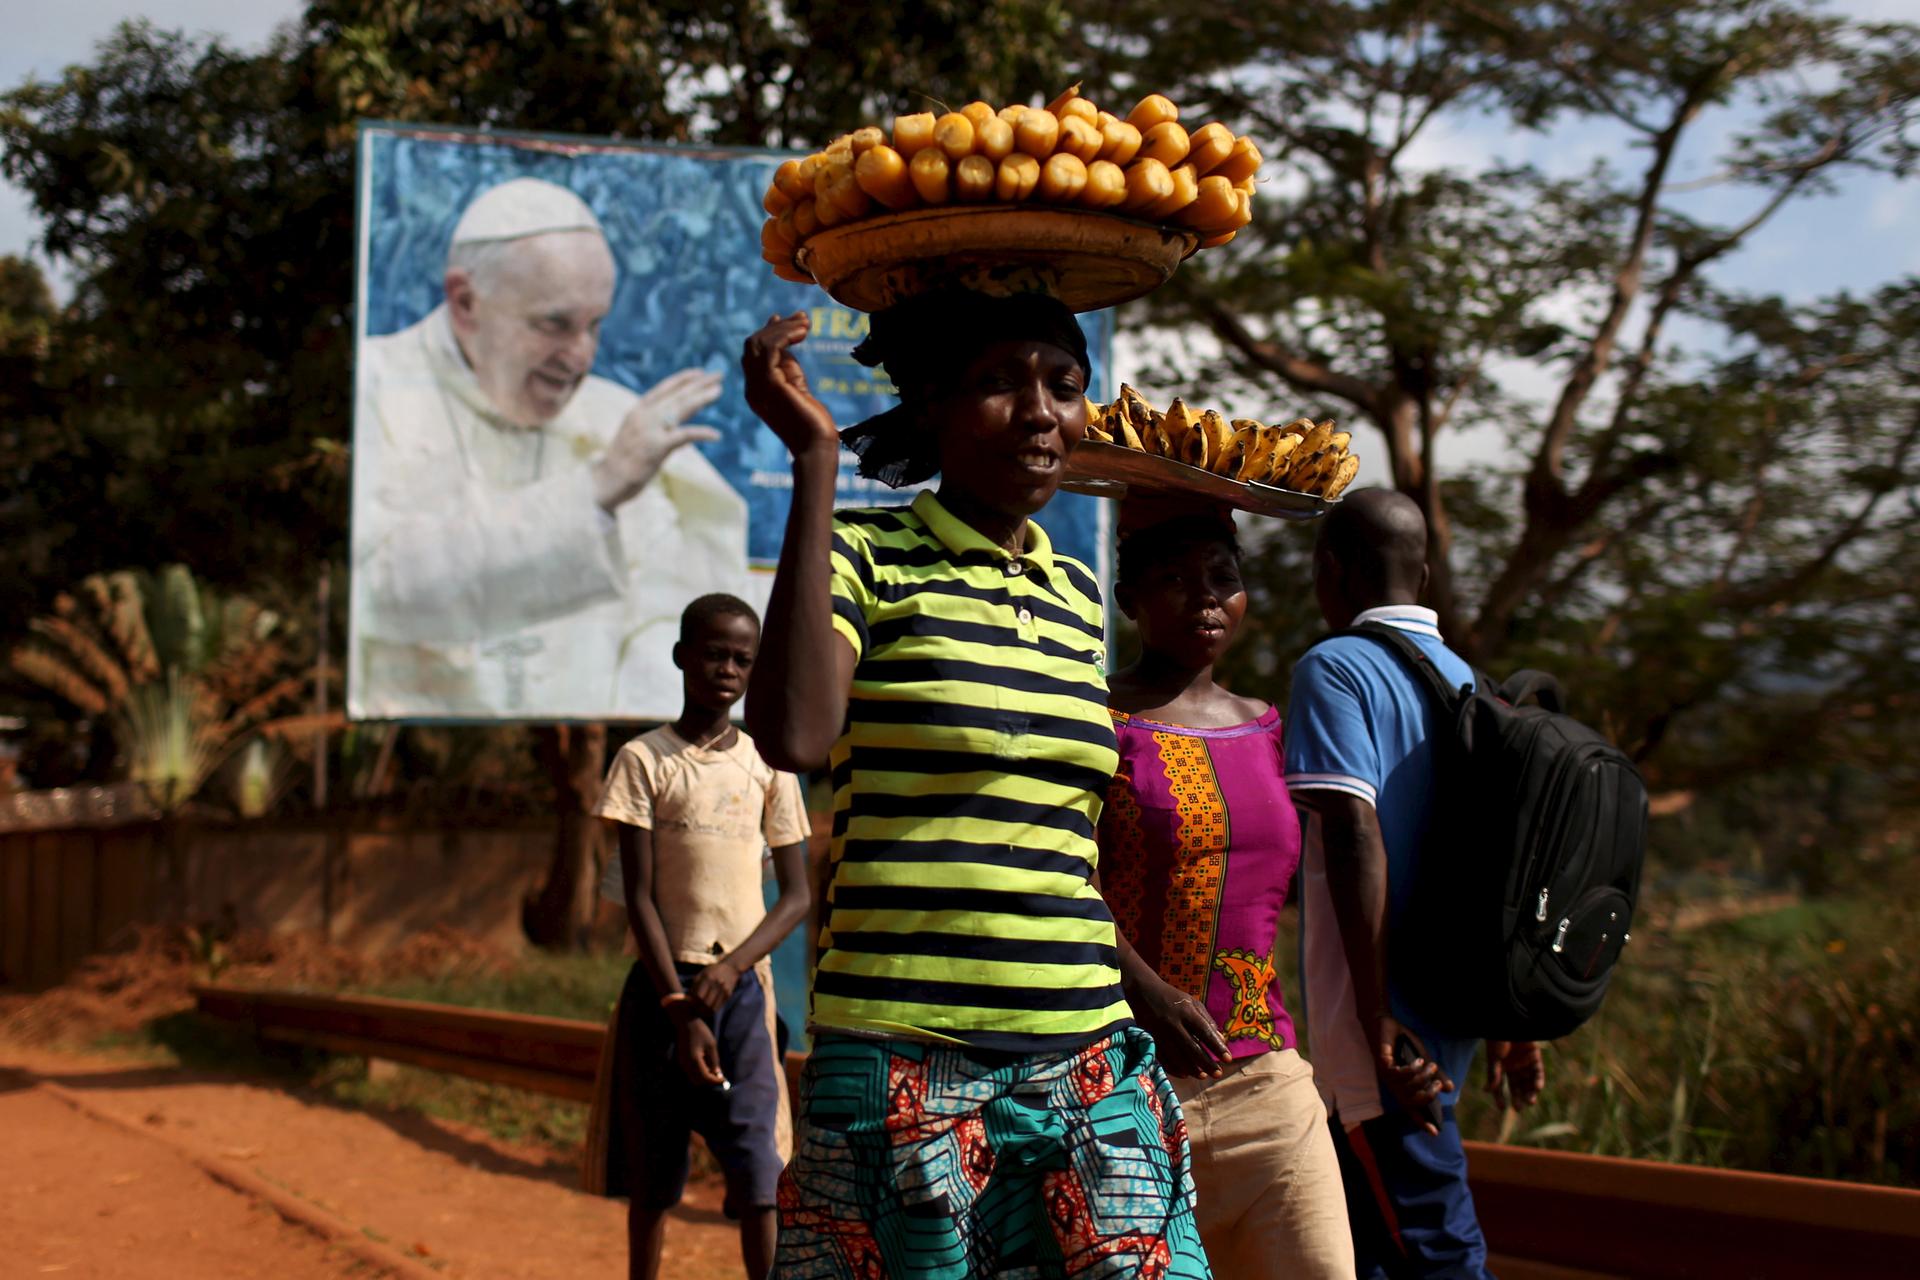 Women carrying fruits and vegetables on their heads walk past a billboard with a photograph of Pope Francis, in Bangui, Central African Republic; November 26, 2015.